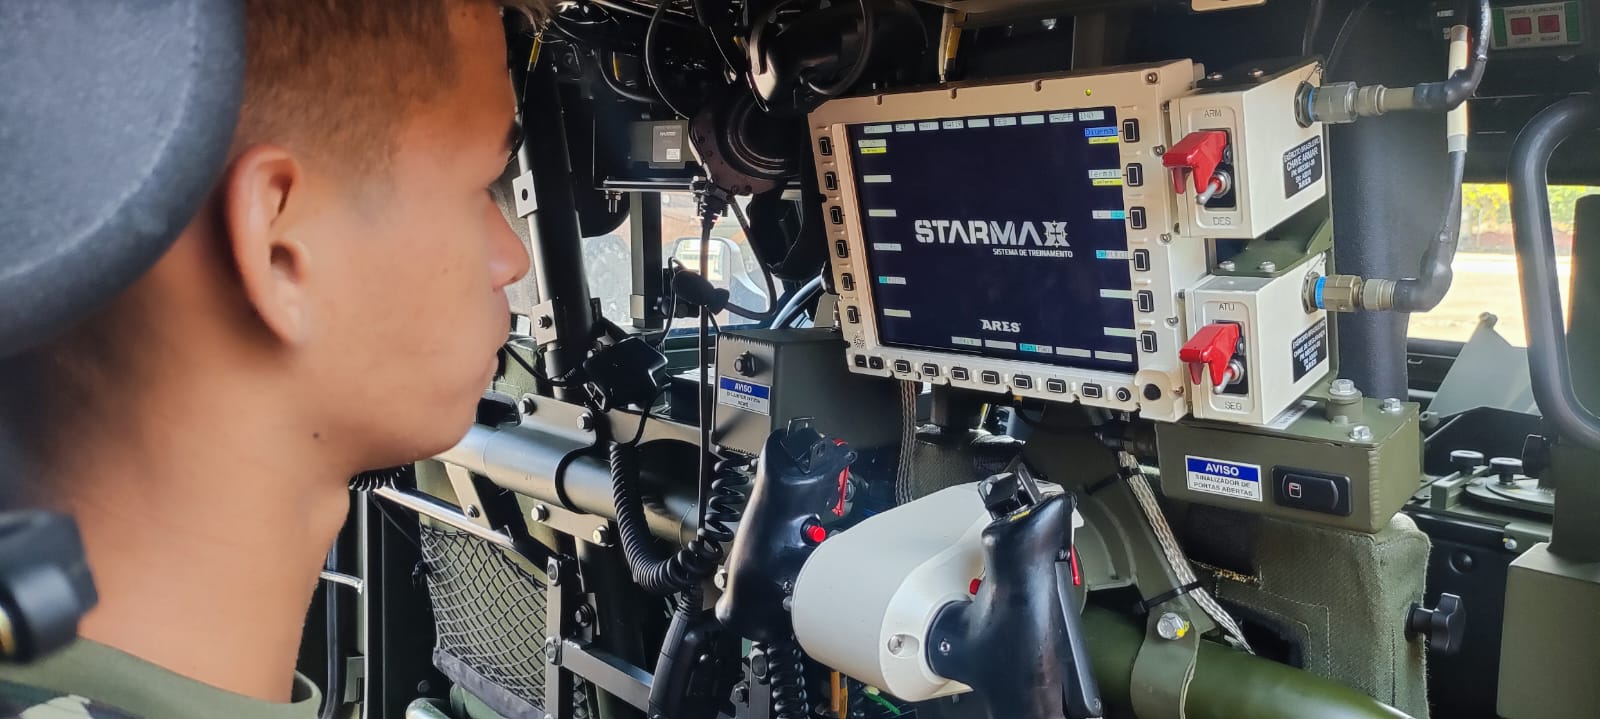 Ares, in collaboration with the Brazilian Army, conducted specialized training in the use of the REMAX System, using the STARMAX simulator